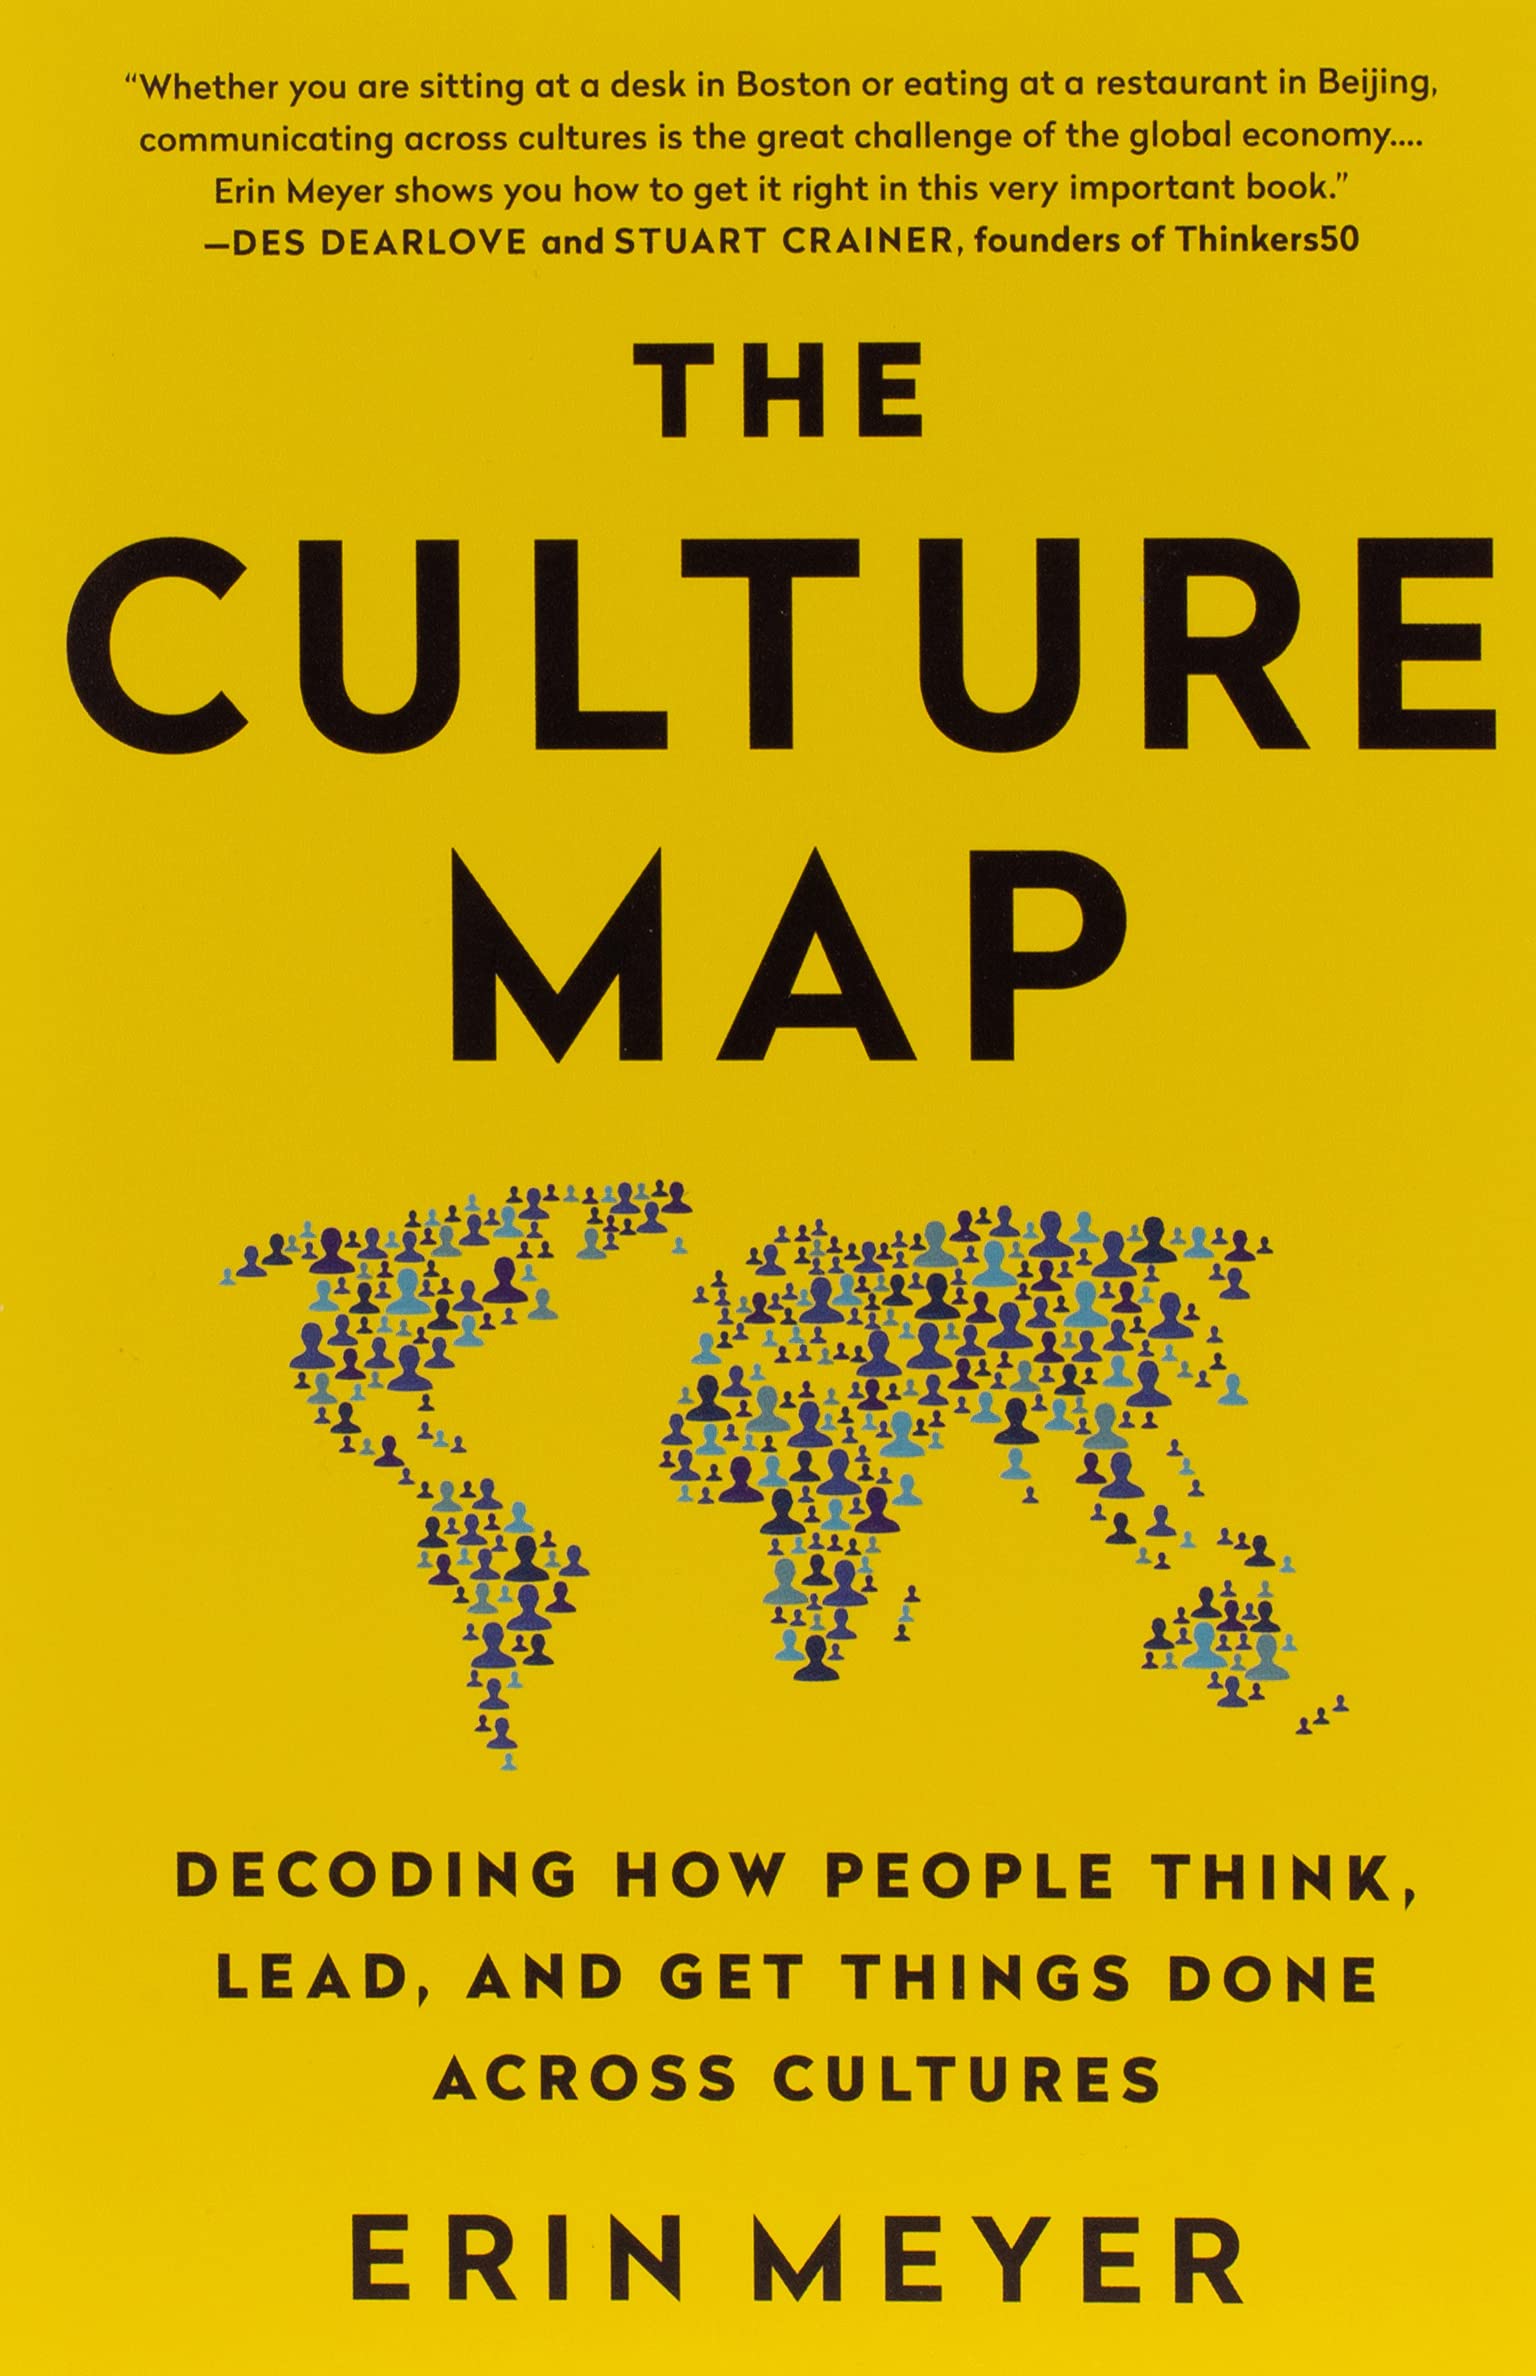 Book Cover of “The Culture Map”